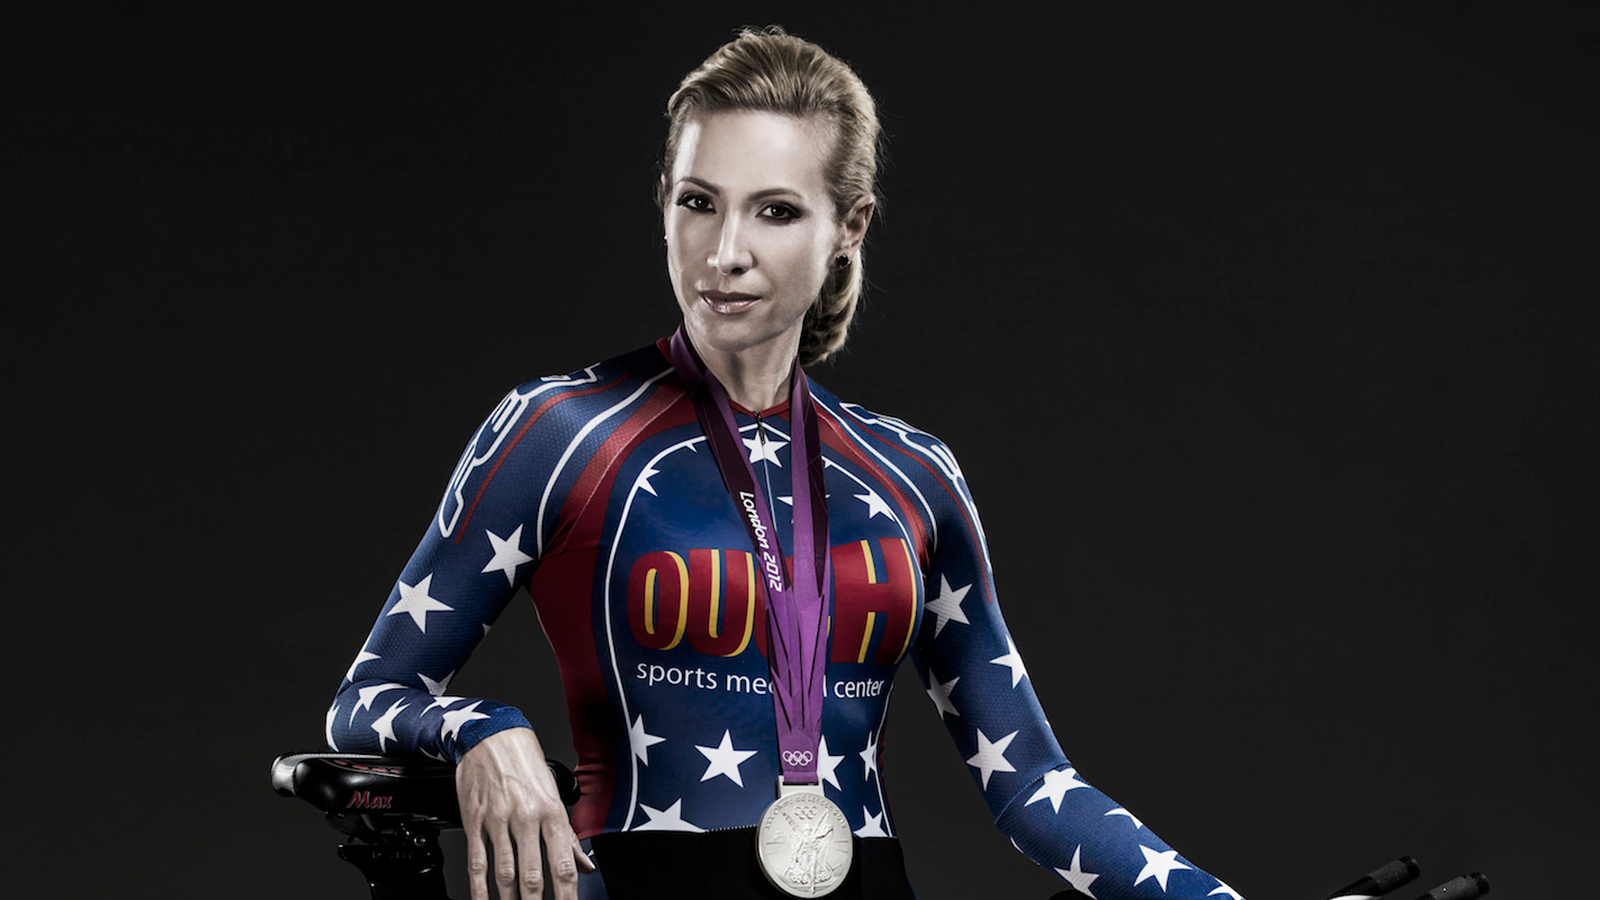 Team USA Athletes Demand Olympic And Paralympic Committee To Stop Promoting Dairy